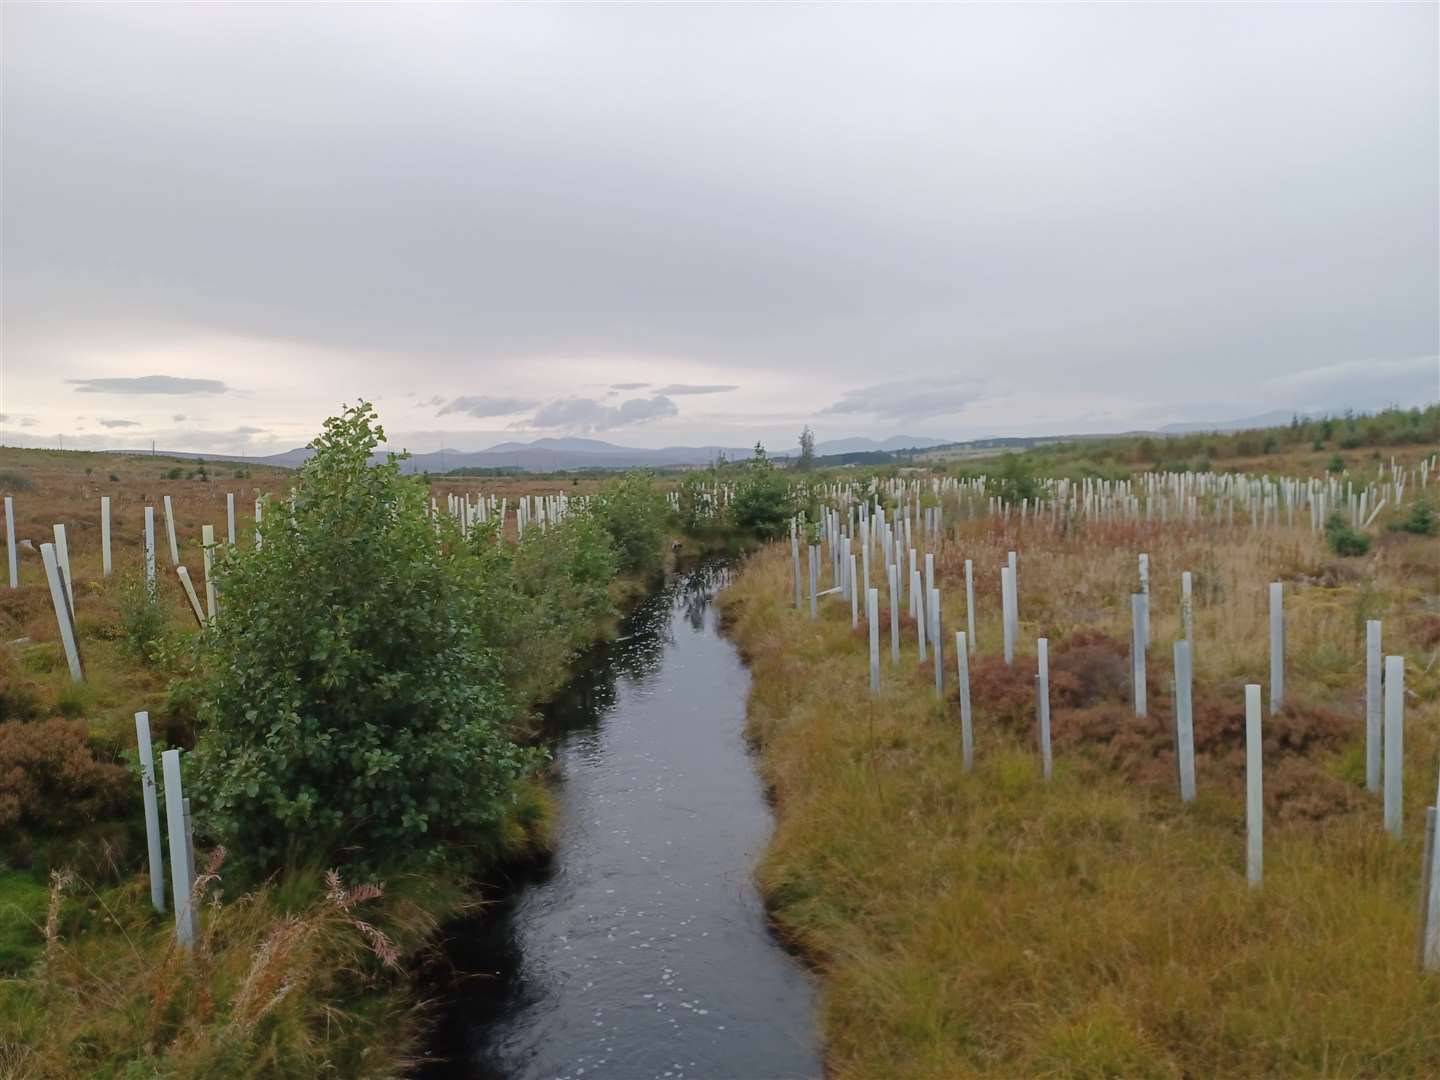 Foresters at Forestry and Land Scotland are now planting hundreds of hectares of new ‘riparian’ (riverside) woodlands, in all regions, but especially in the north of Scotland.